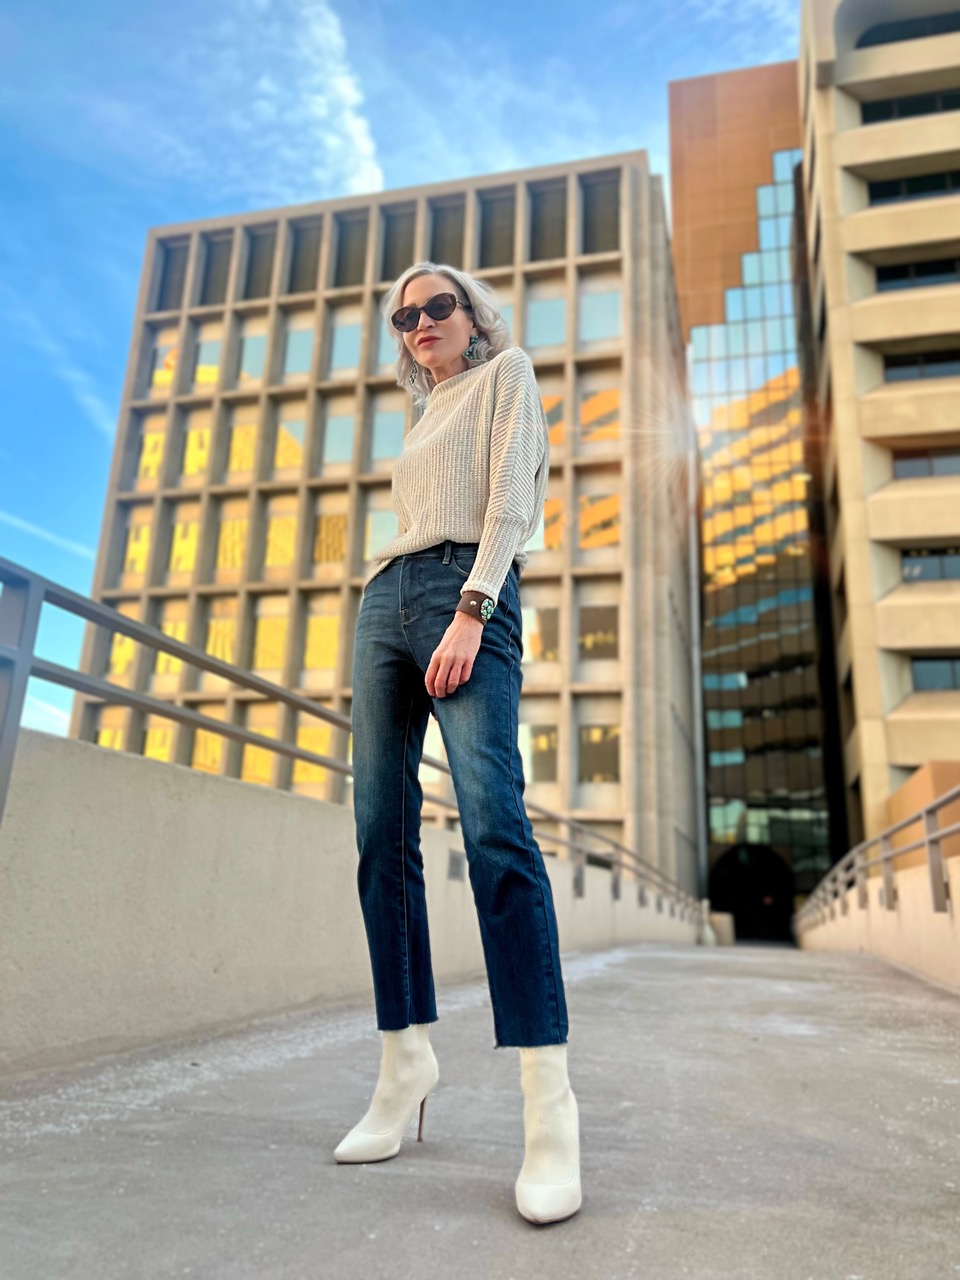 Lifestyle Influencer, Jamie Lewinger of More Than Turquoise wearing Gibsonlook new arrivals 